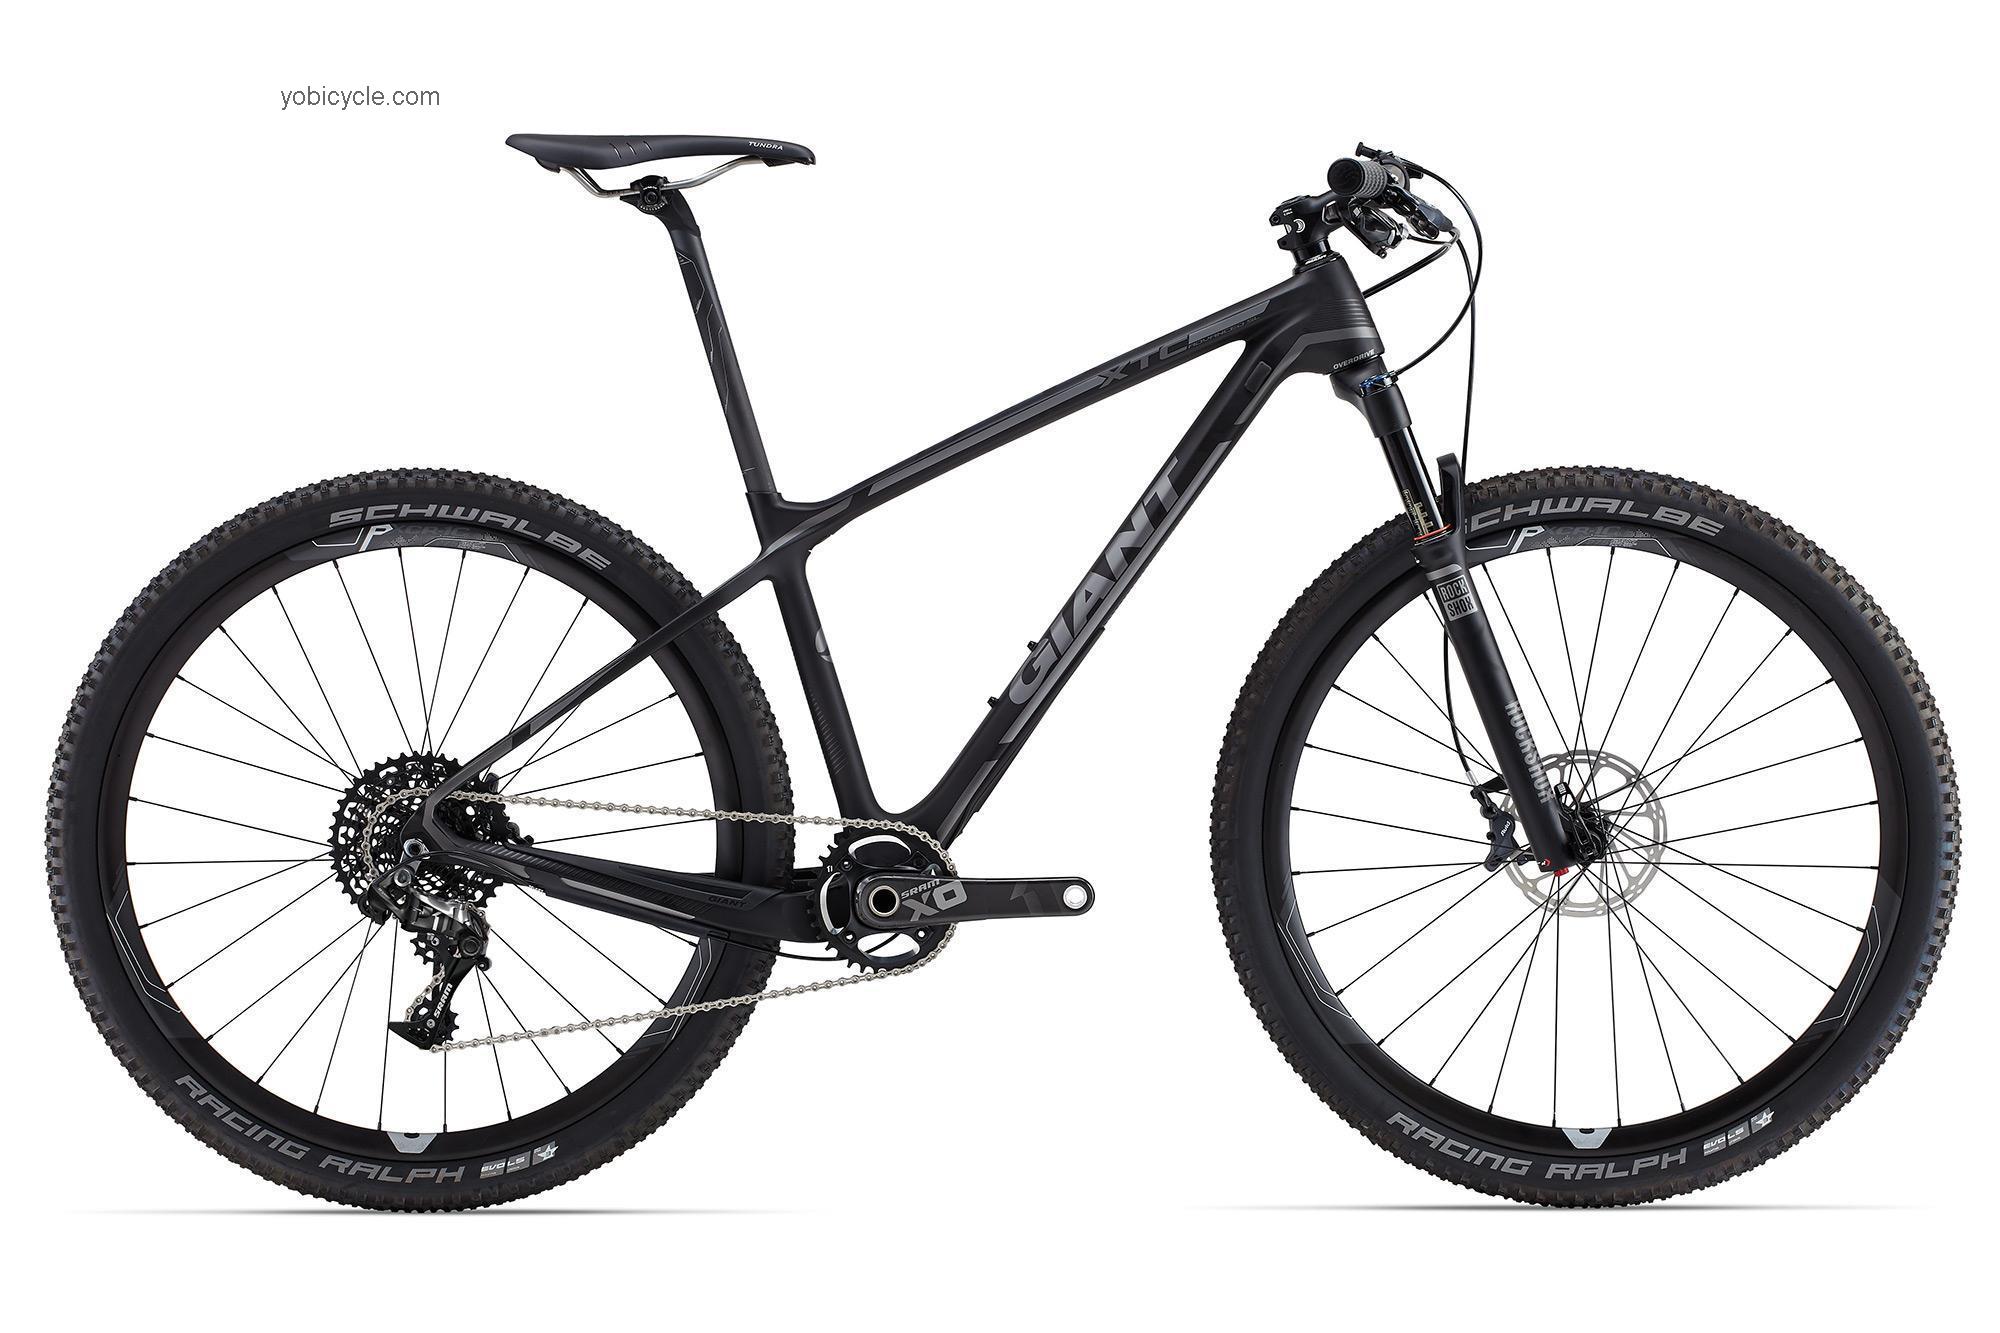 Giant XTC Advanced SL 27.5 1 competitors and comparison tool online specs and performance